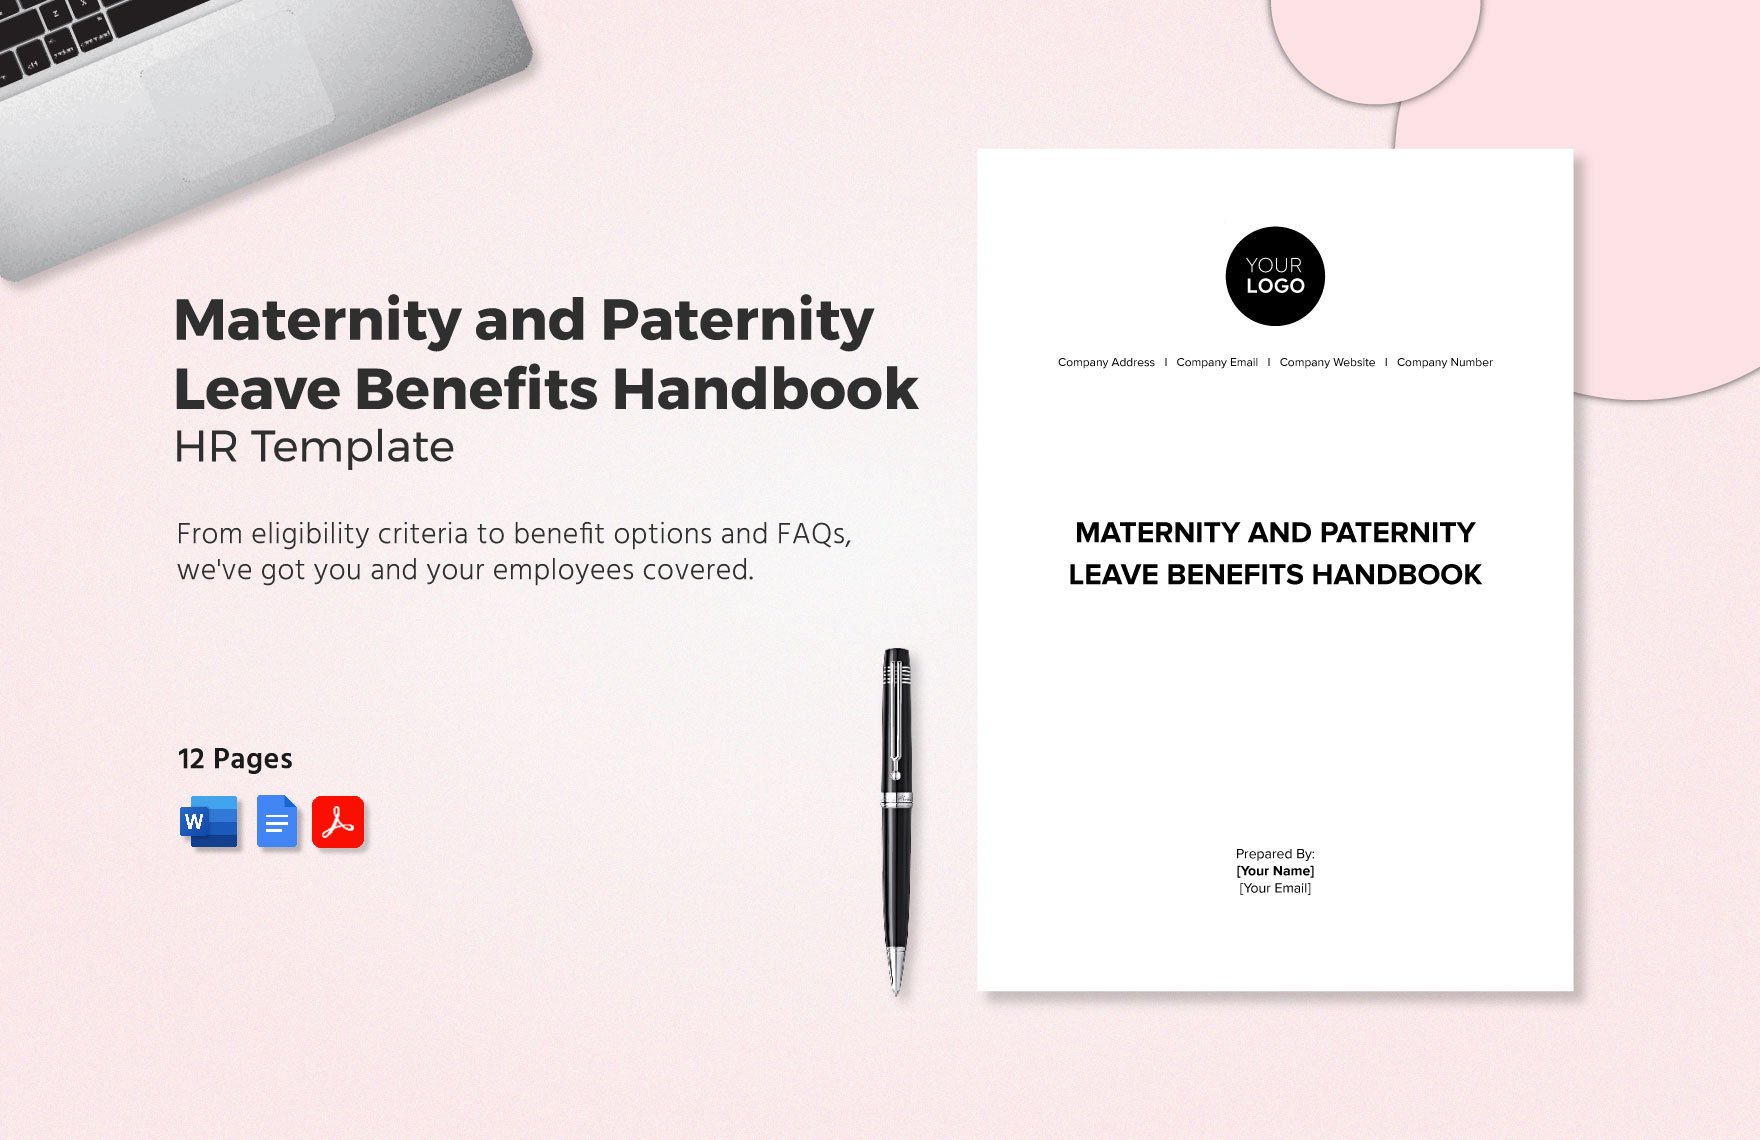 Maternity and Paternity Leave Benefits Handbook HR Template in Word, Google Docs, PDF